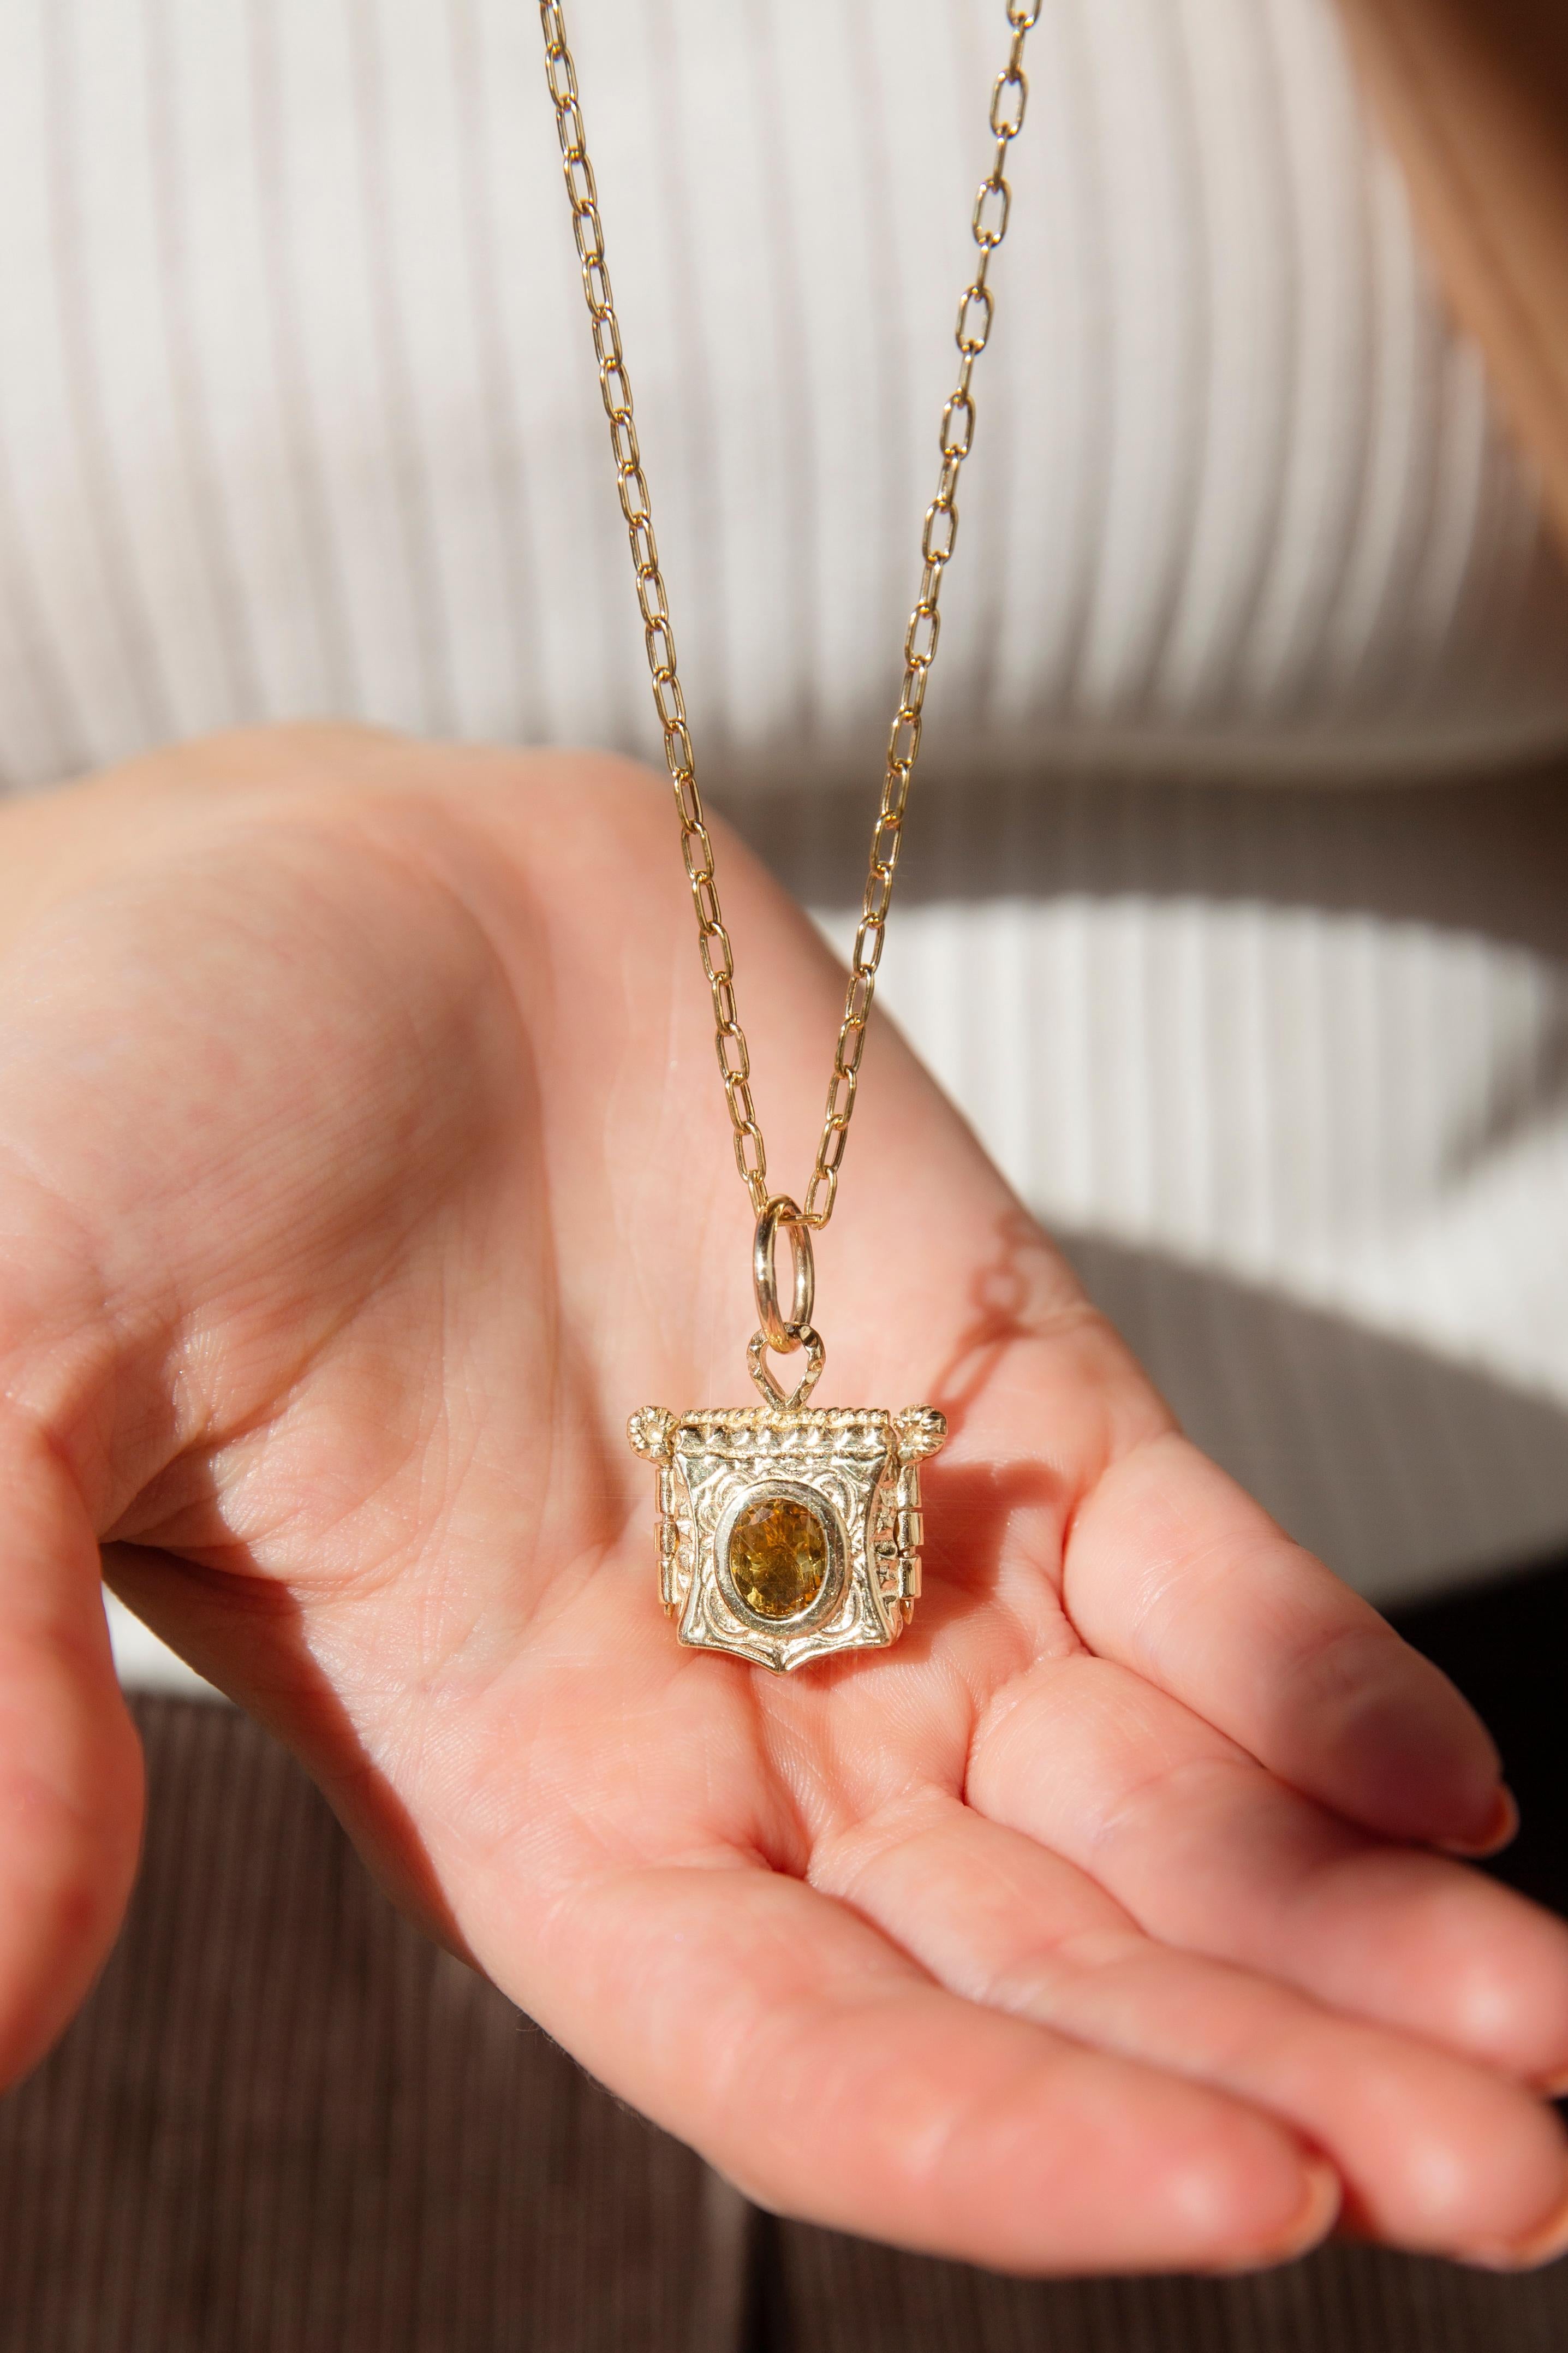 Expertly crafted in 18 carat gold, The Albertine Locket is a sweet gift. Her gorgeous pinned locket frames the most vivid of citrines and is etched with ribbons of swirling gold. Within is a space to store the photos of loved ones that find their